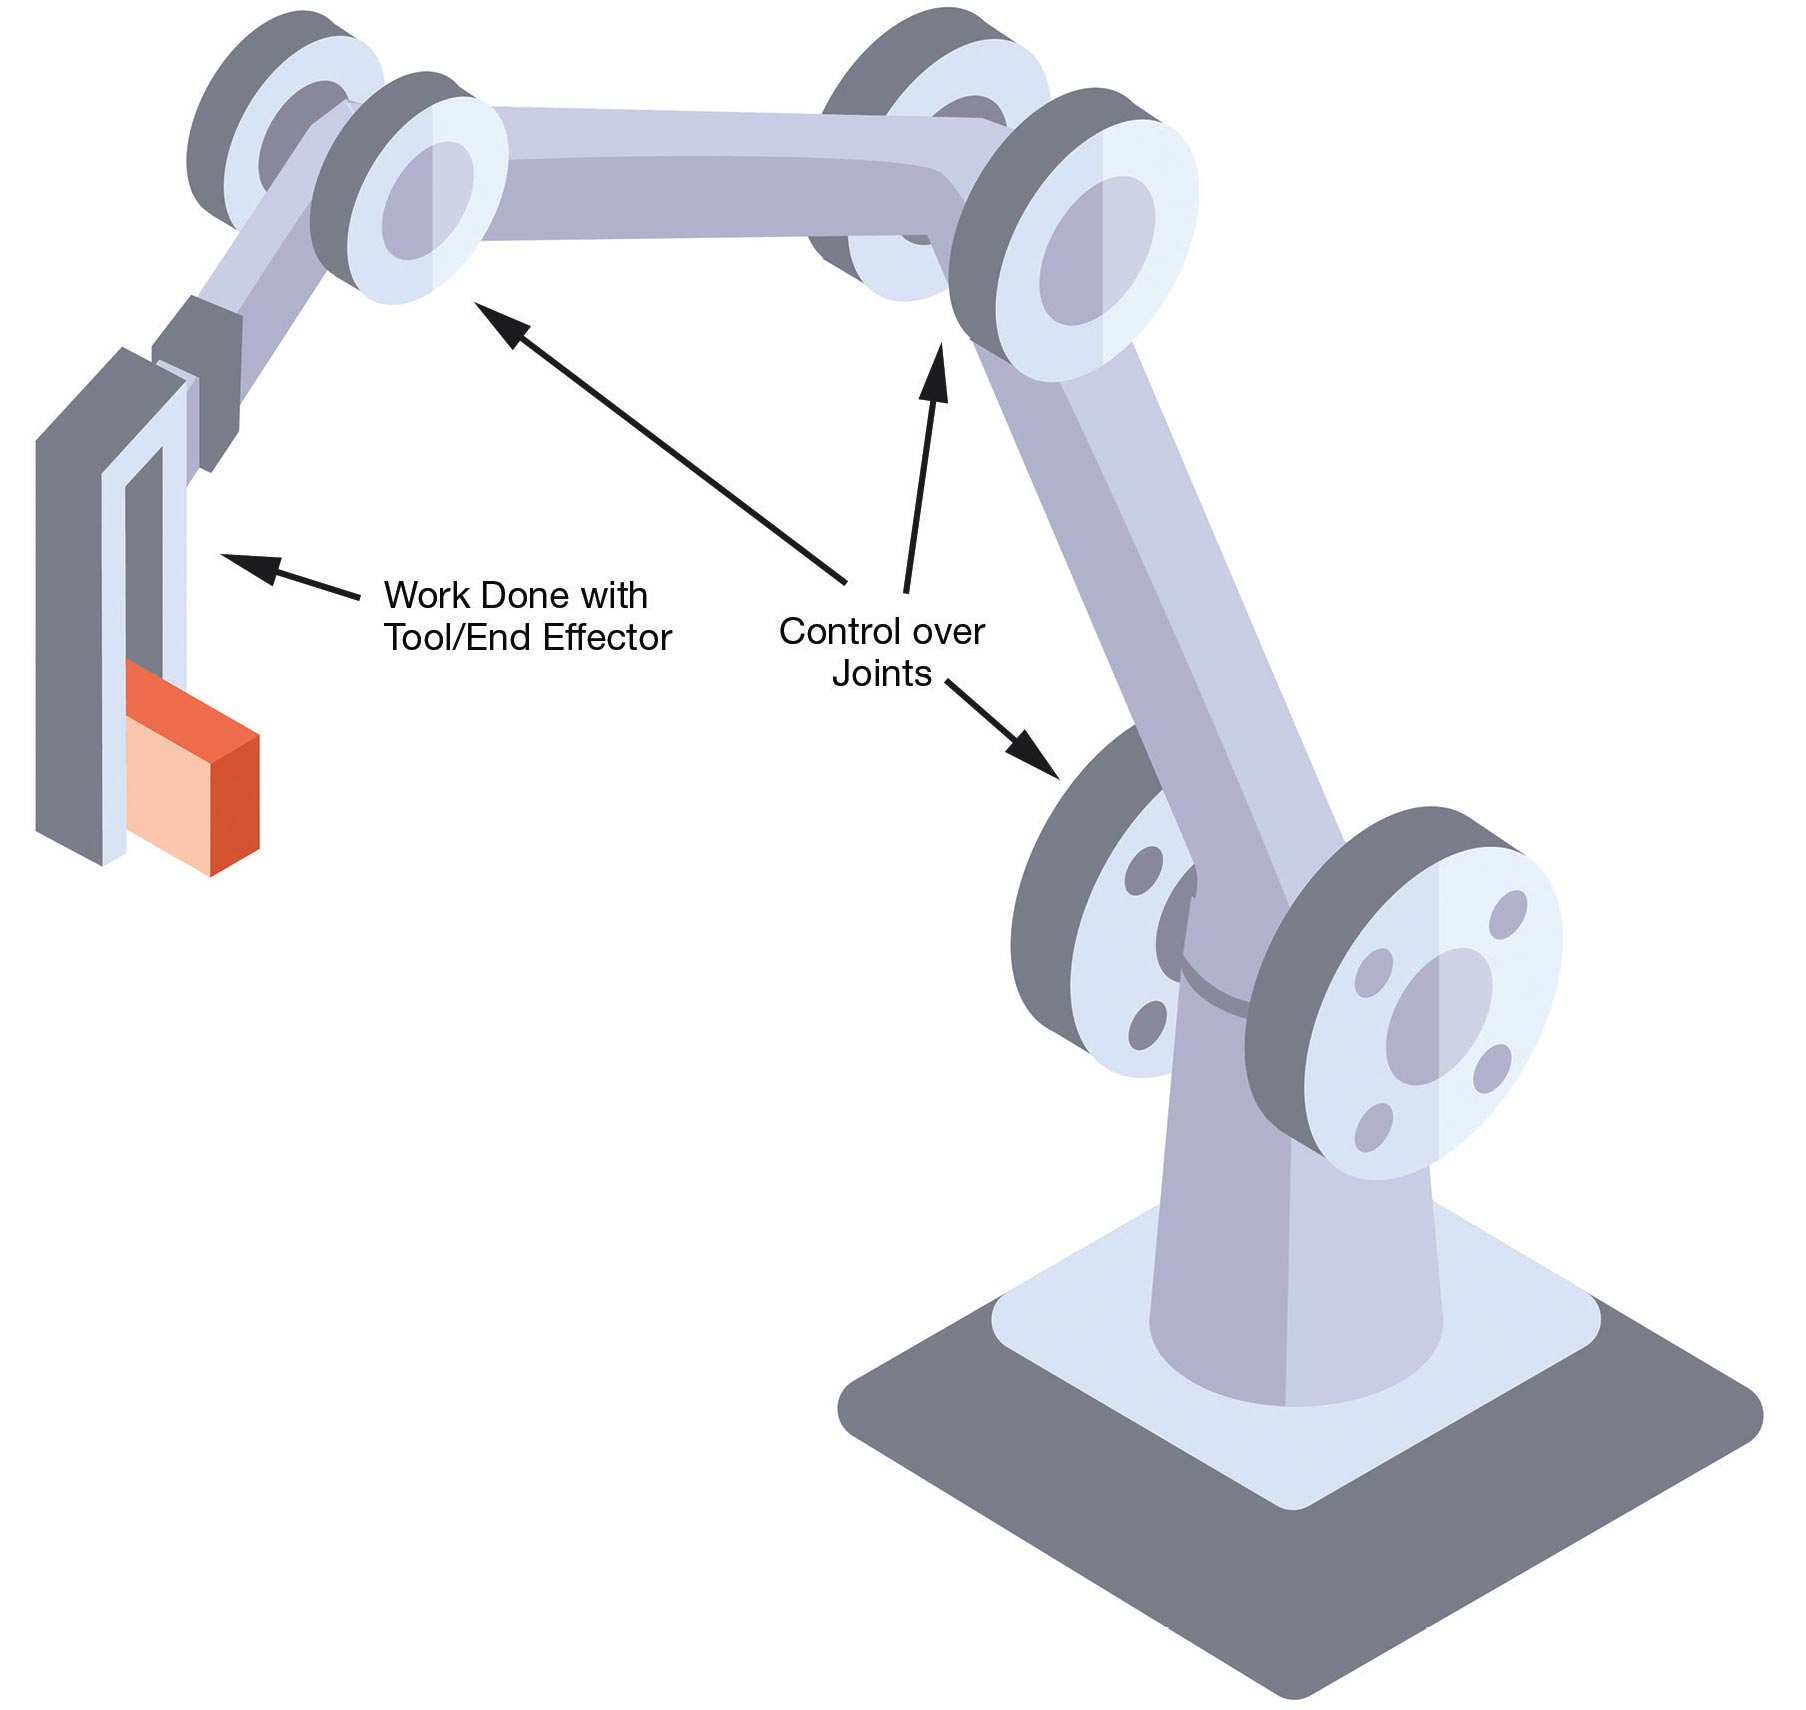 The motion control problem involves how the joints are moved to achieve desired motion of the tool (or end effector). Courtesy of Energid Technologies Corp.